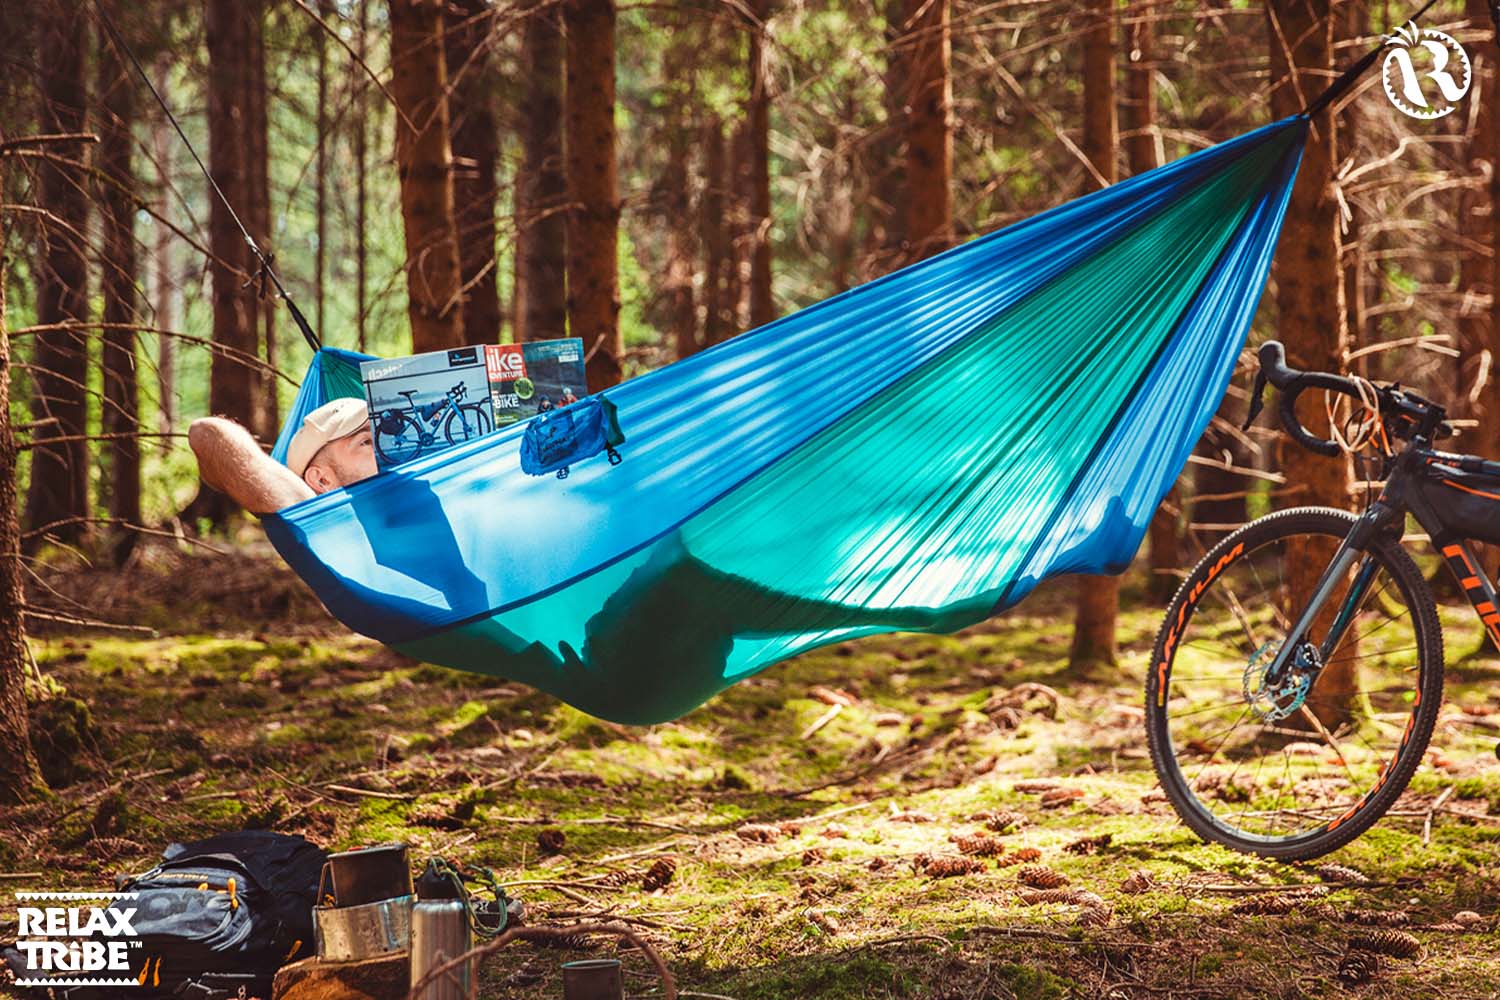 adventure-ice-blue-single-portable-travel-hammock-outdoor-camping-green-blue-forest-trees-bike